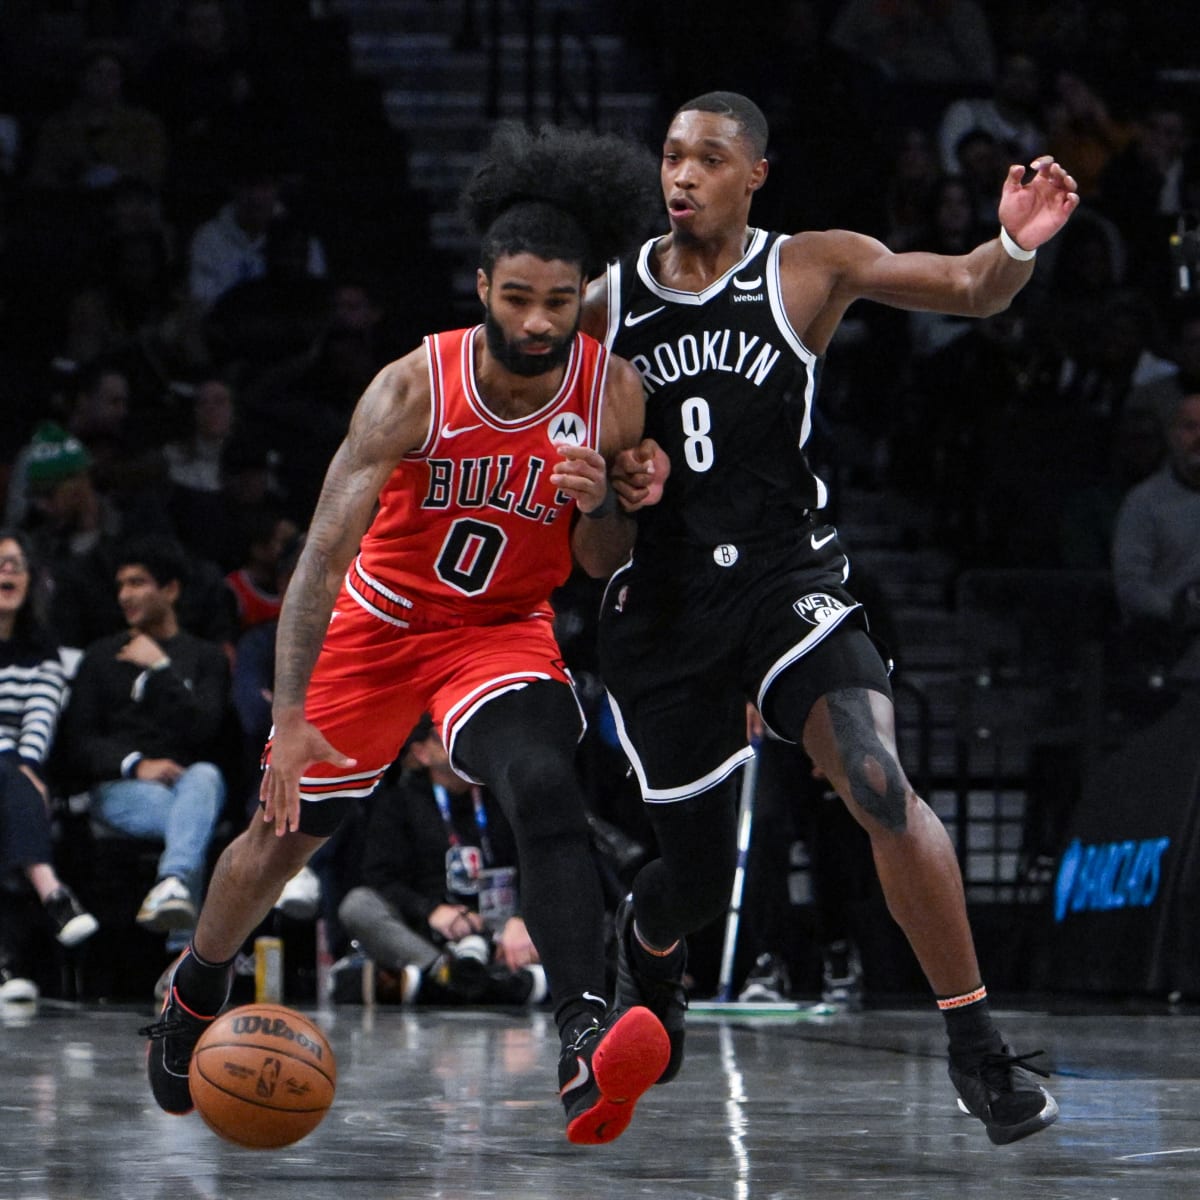 How to Watch Bulls at Nets: Live Stream, TV Channel, Start Time, Preview -  On Tap Sports Net